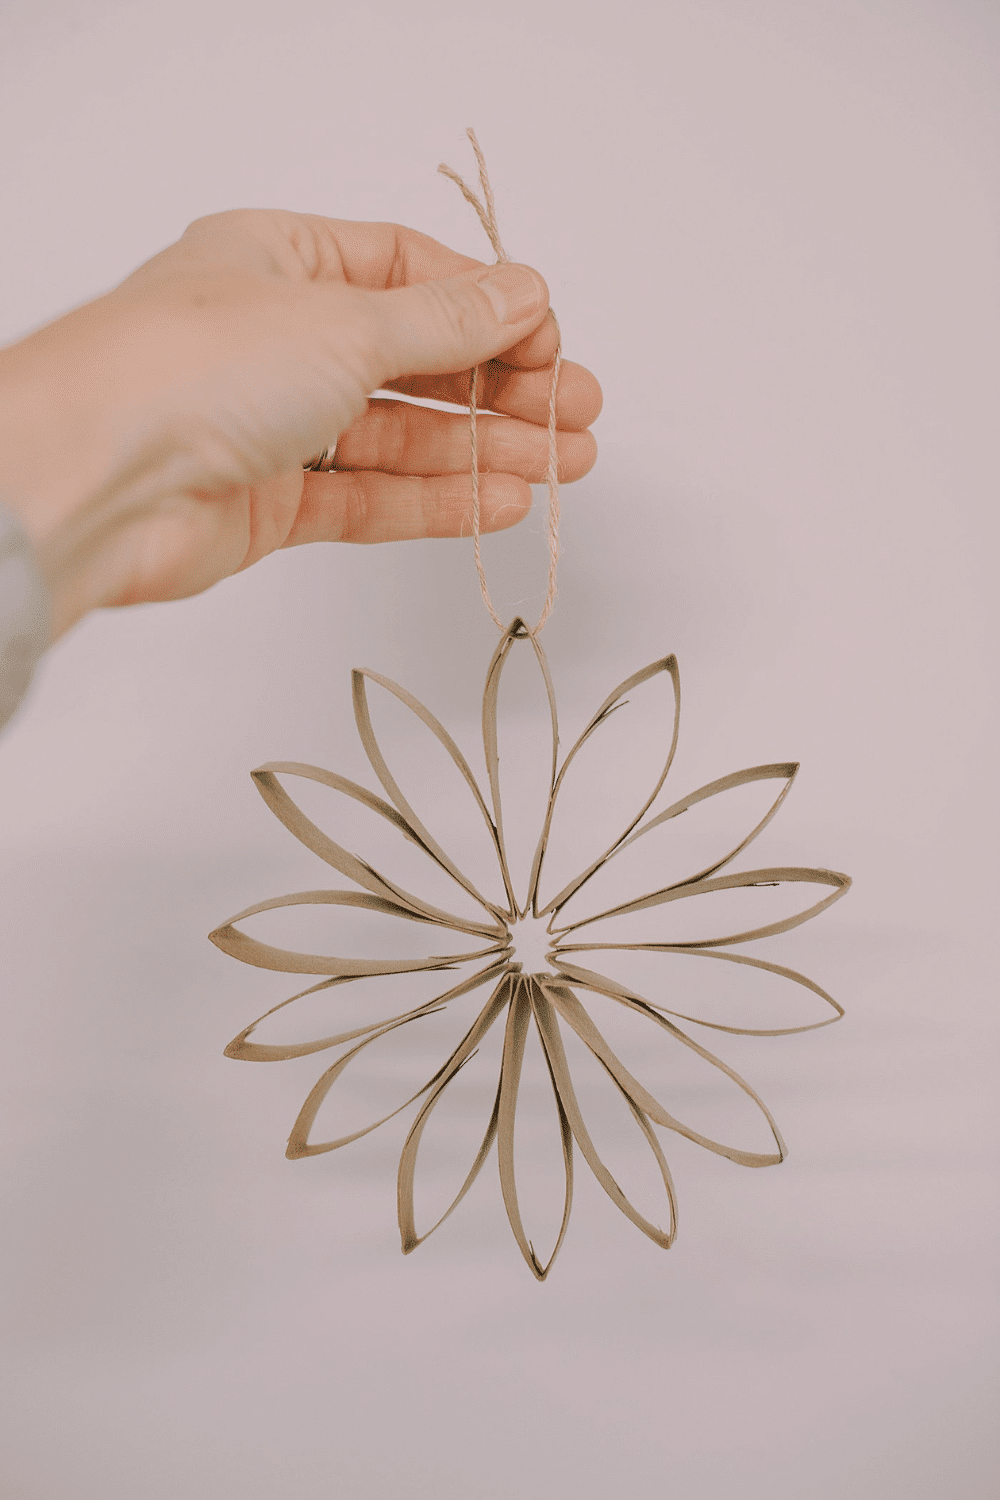 How to Make Toilet Paper Flower Ornaments